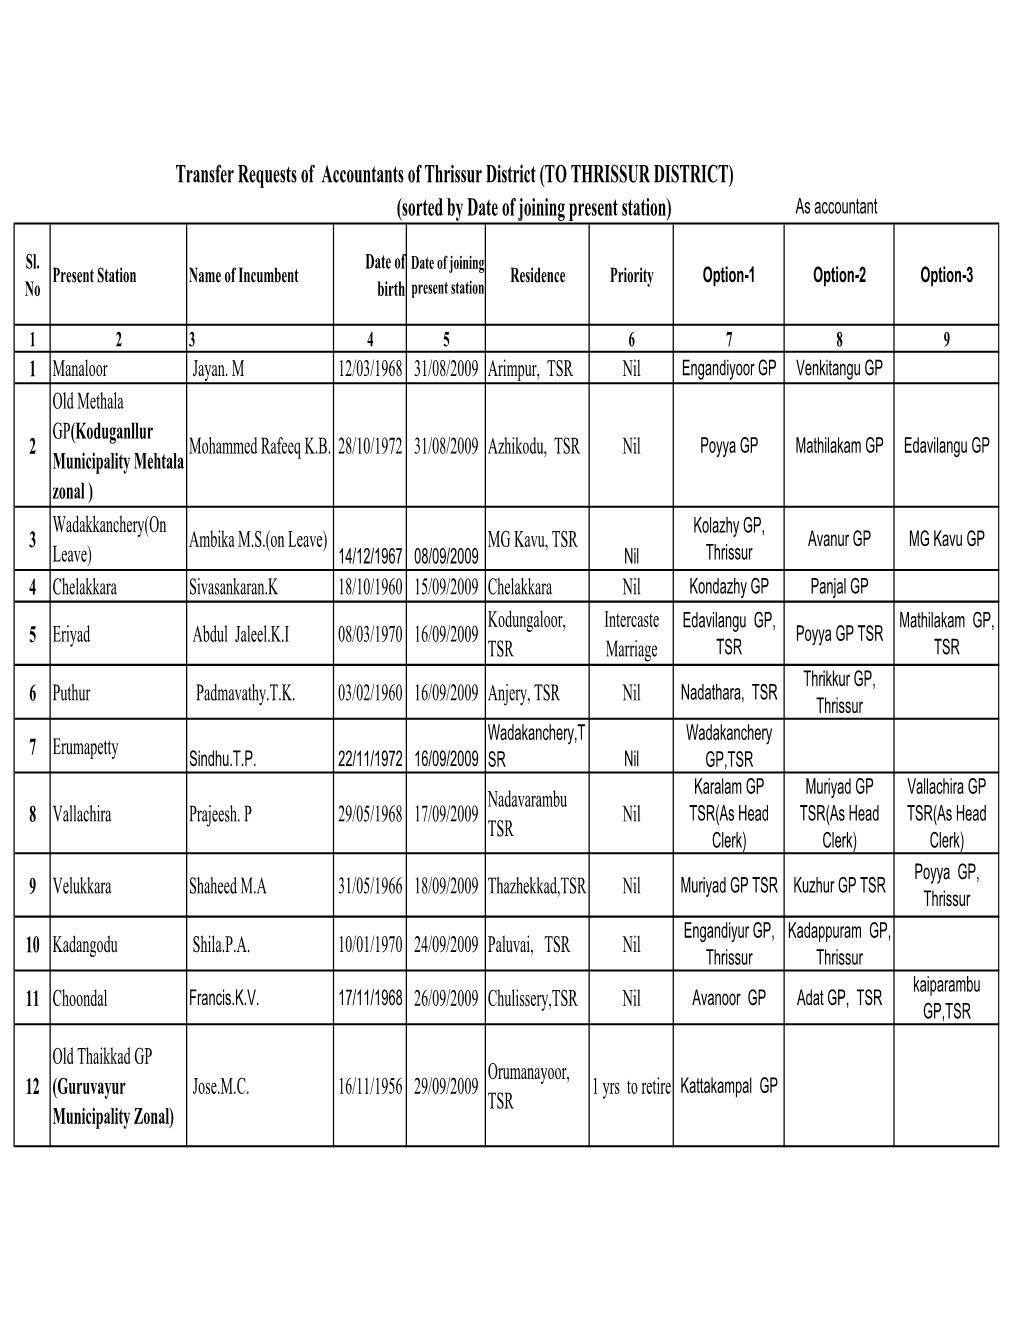 (TO THRISSUR DISTRICT) (Sorted by Date of Joining Present Station) As Accountant